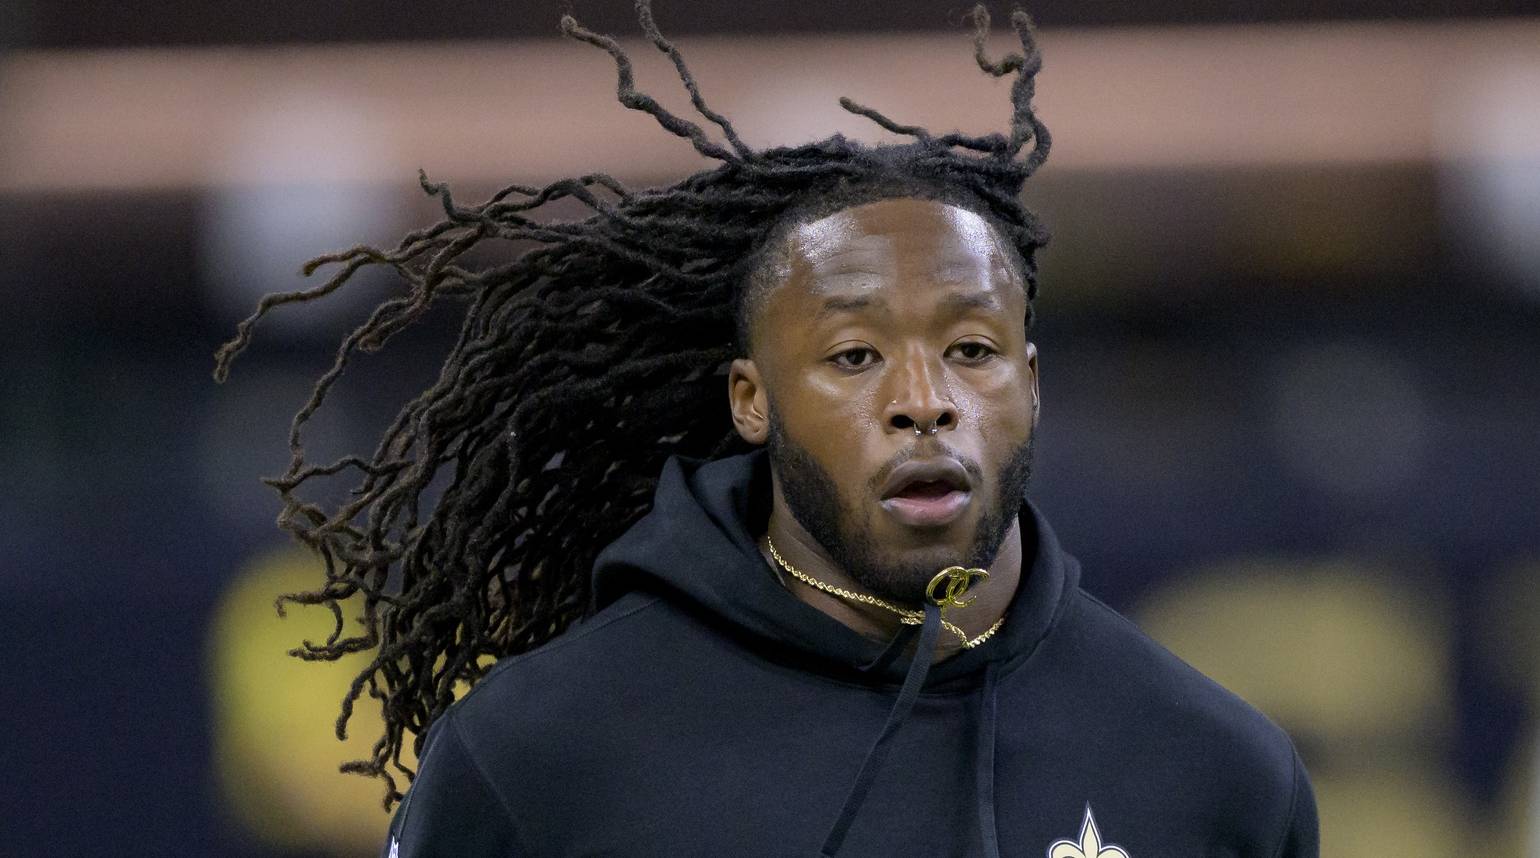 Saints running back Alvin Kamara jogs on a field while warming up before a game